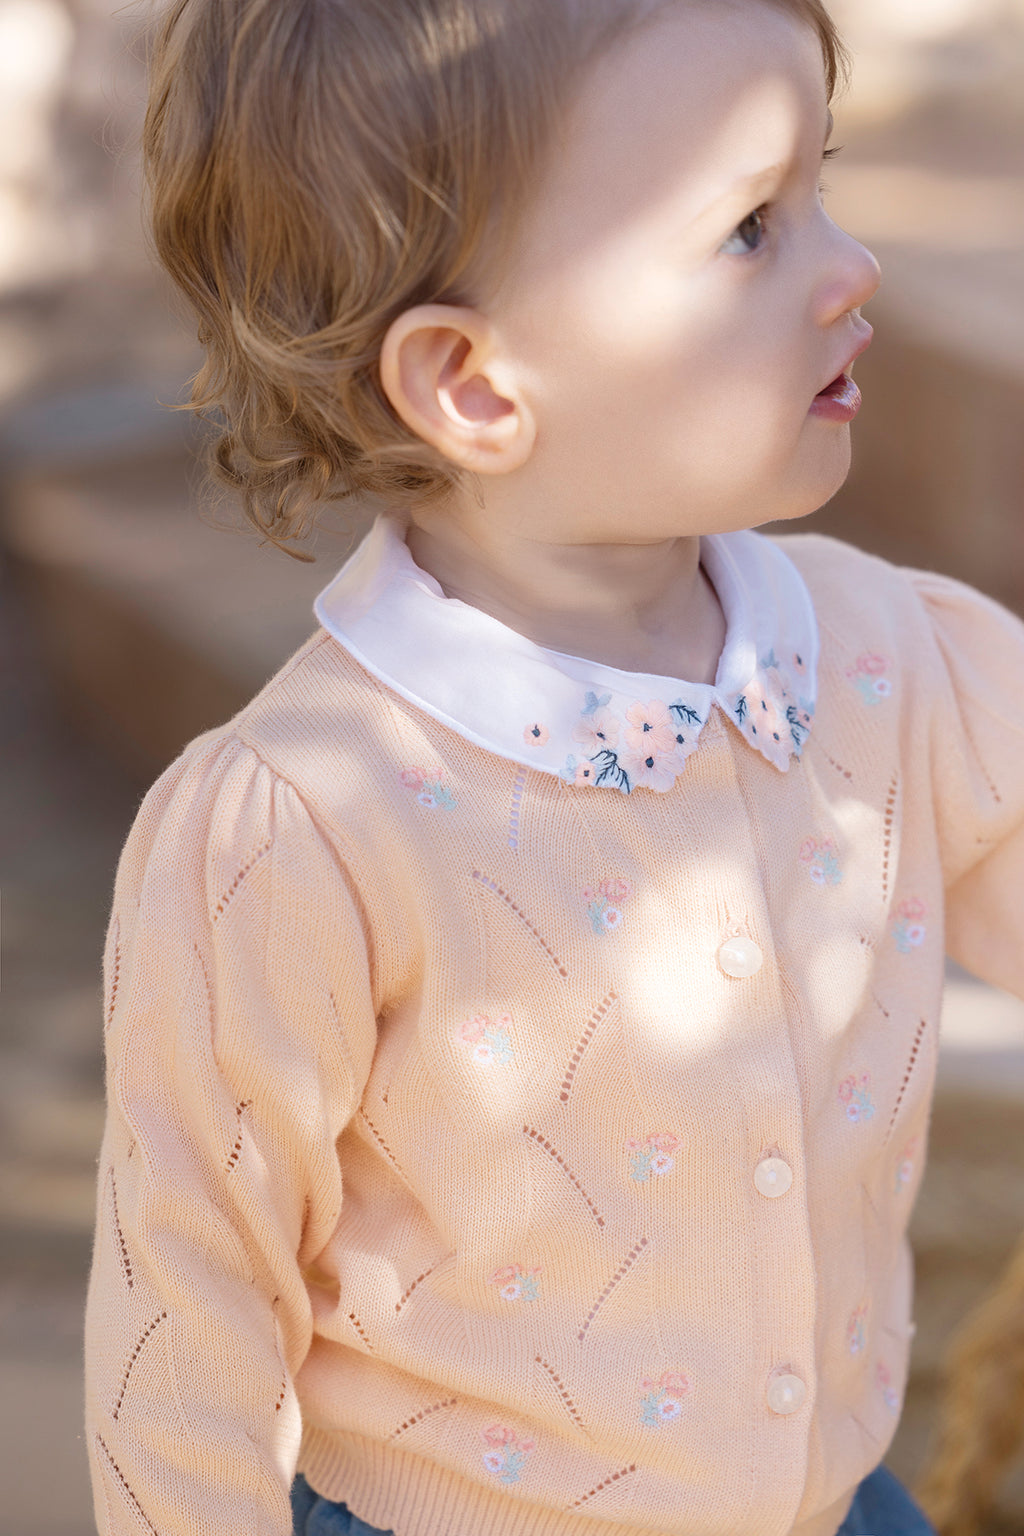 Cardigan - Peach Embrodery all over